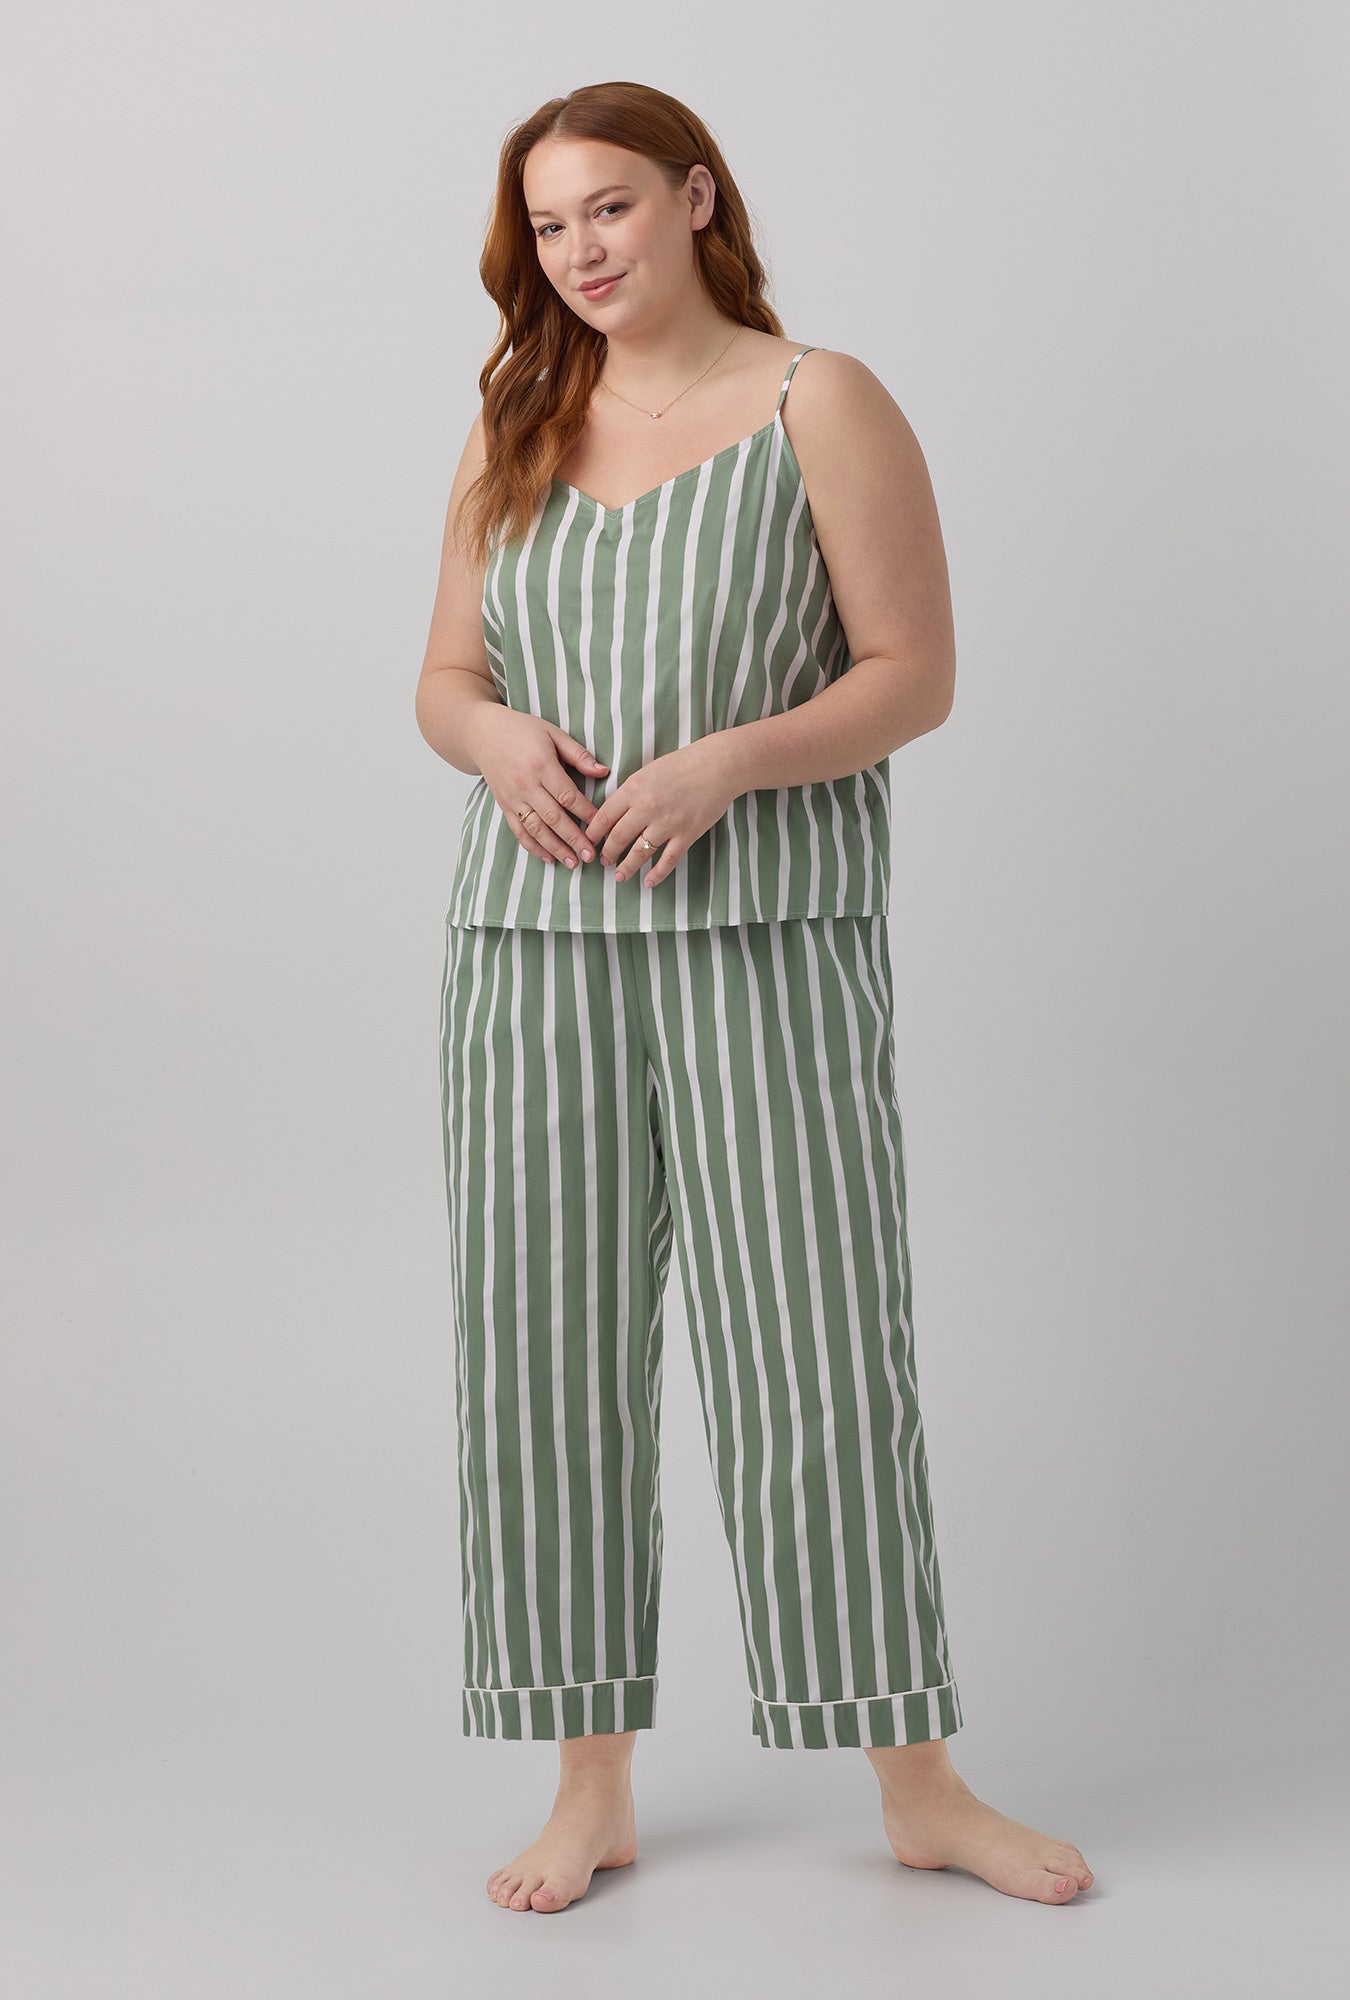 A lady wearing green Woven Cotton Sateen Cropped PJ Set with North Shore Stripe print.